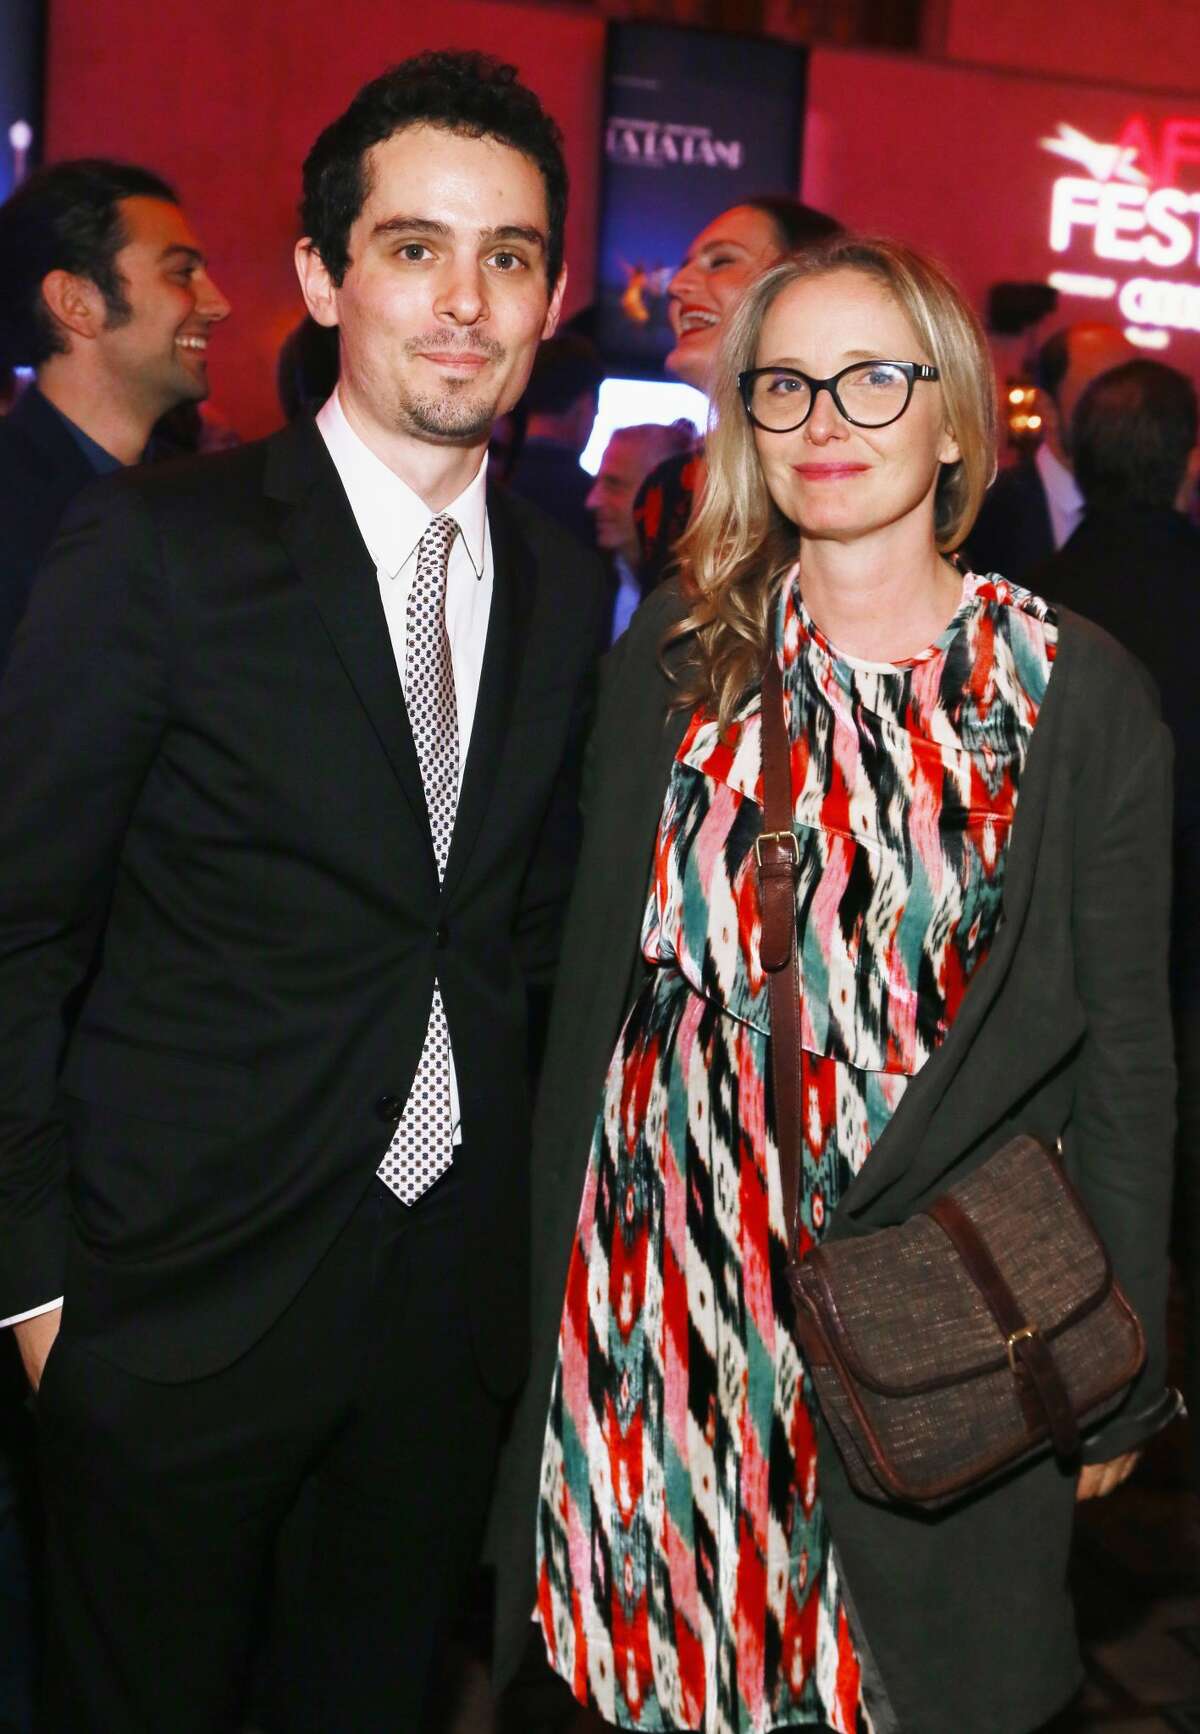 HOLLYWOOD, CA - NOVEMBER 15: Director Damien Chazelle (L) and actress Julie Delpy attend the after party for the premiere of 'LA LA LAND' at AFI Fest 2016, presented by Audi at The Chinese Theatre on November 15, 2016 in Hollywood, California. (Photo by Gabriel Olsen/Getty Images for AFI)